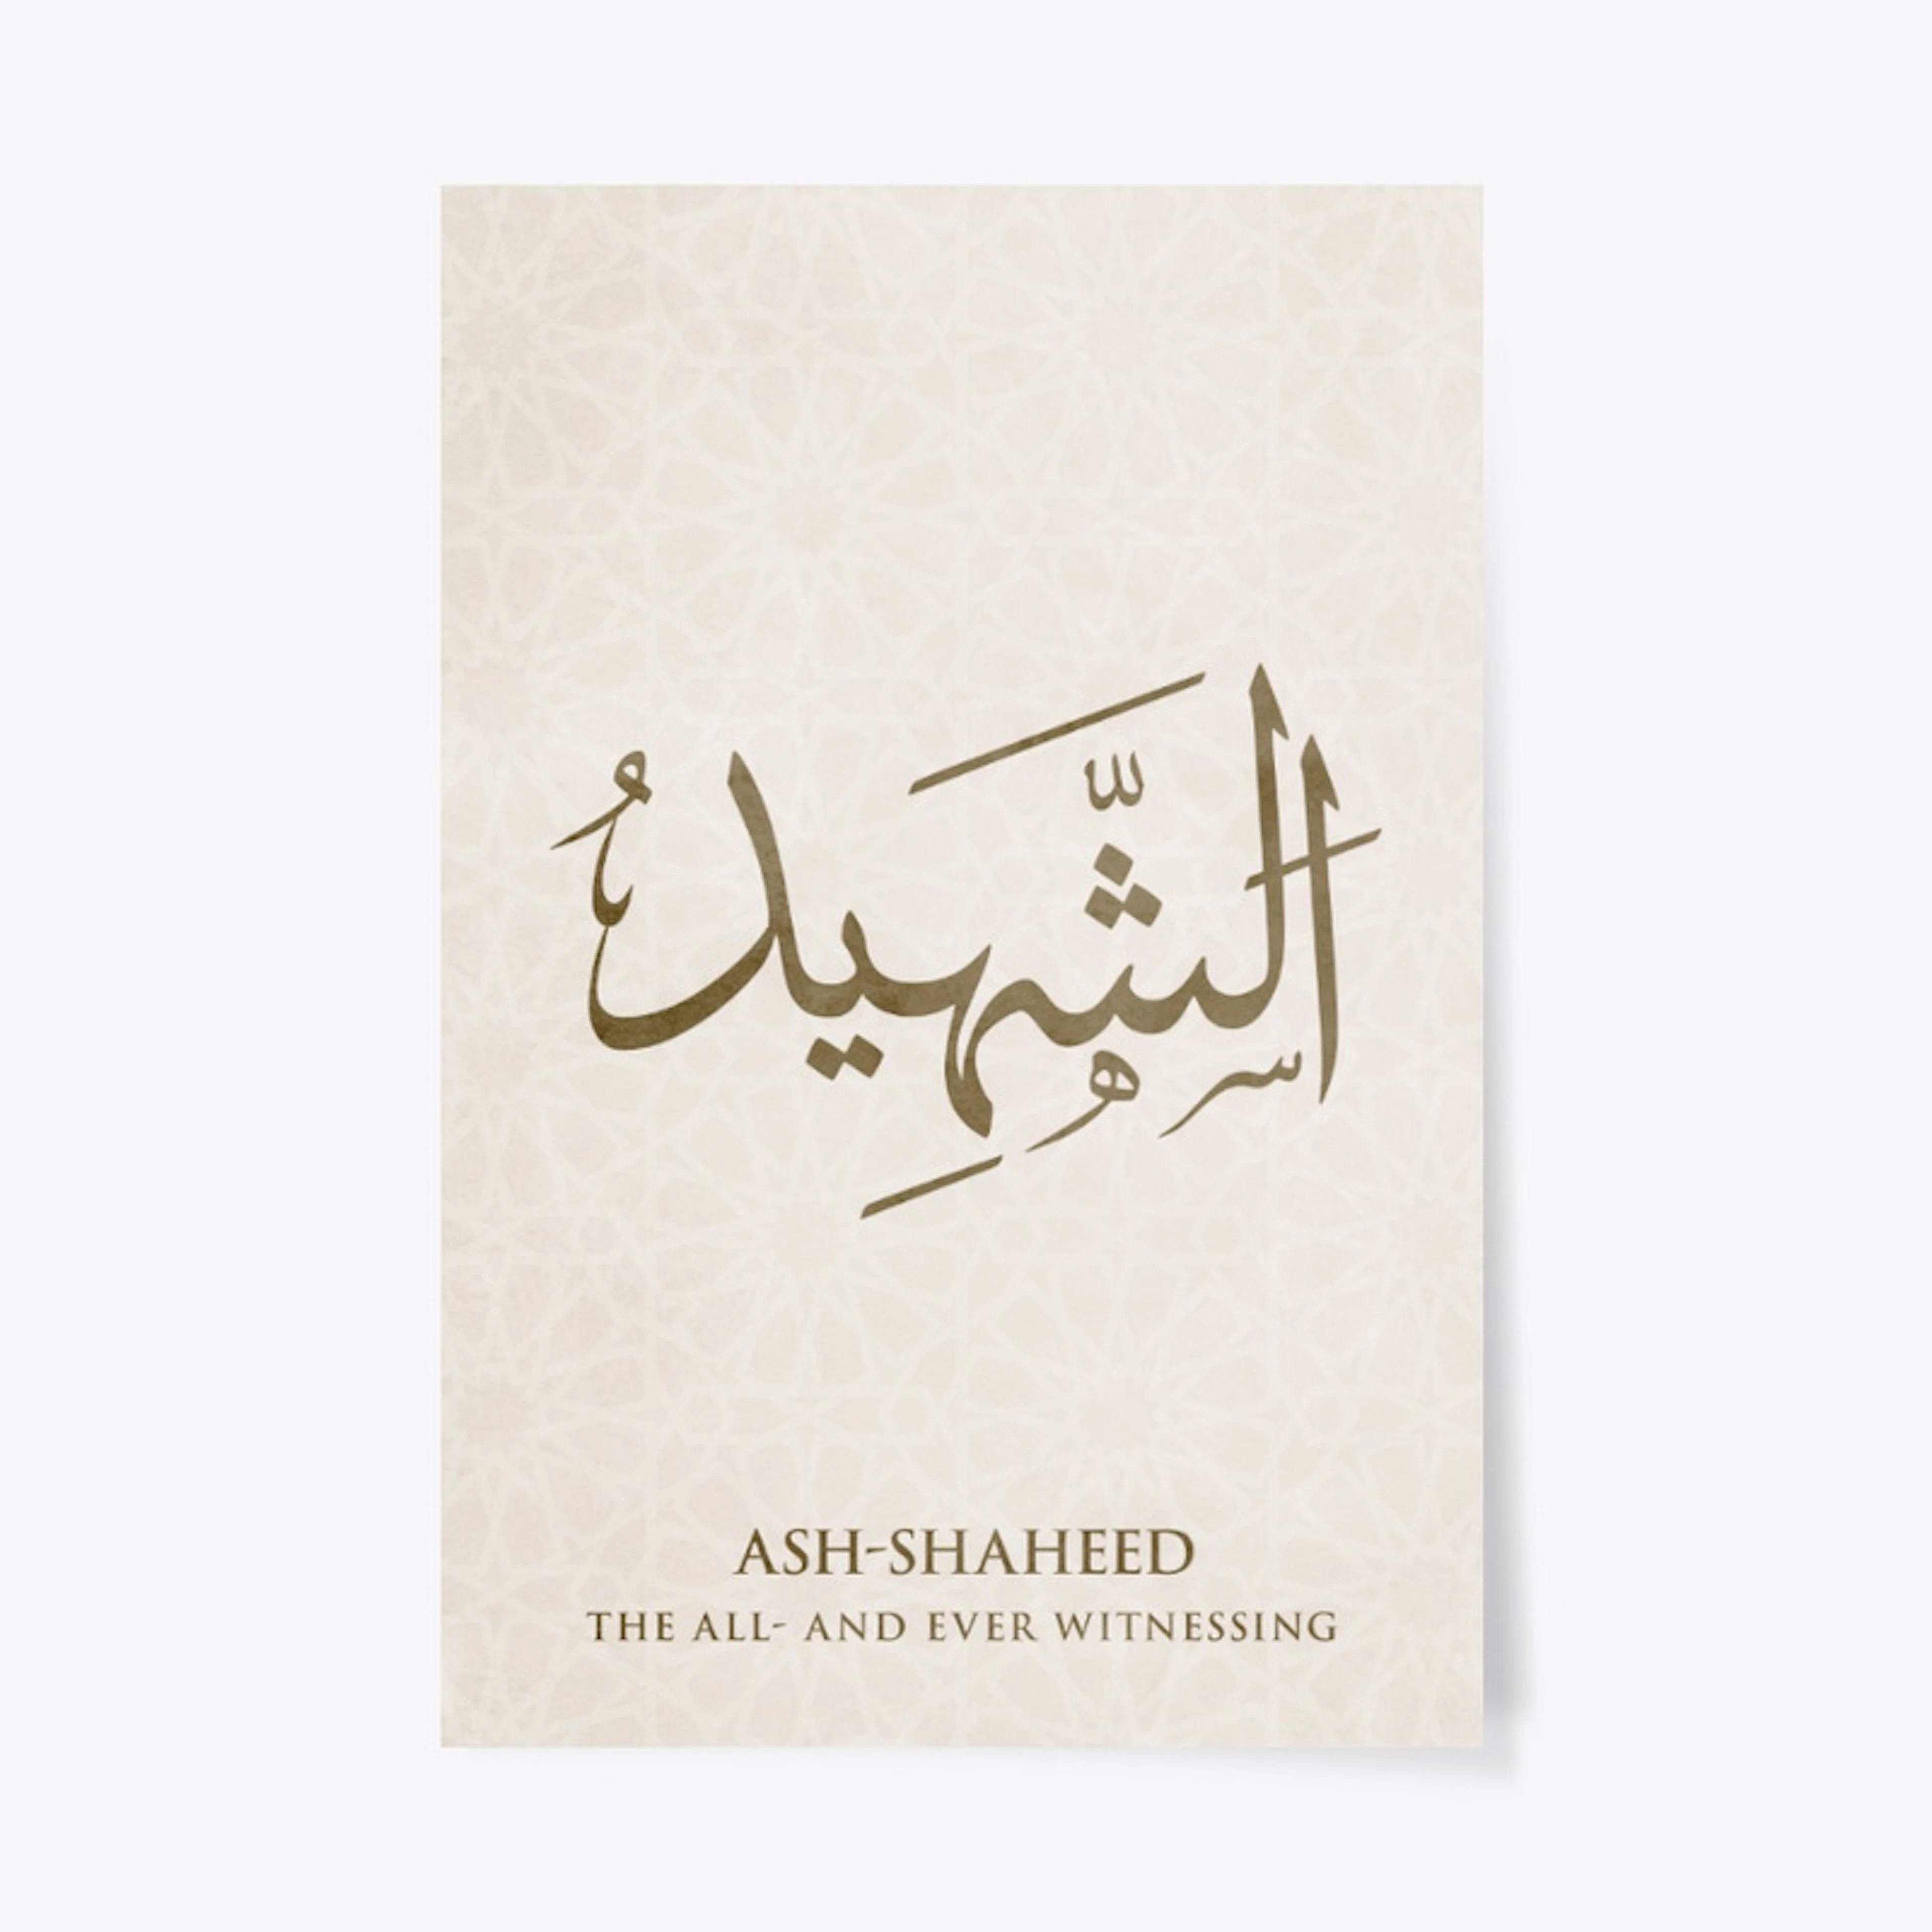 ASH-SHAHEED:THE ALL- AND EVER WITNESSING